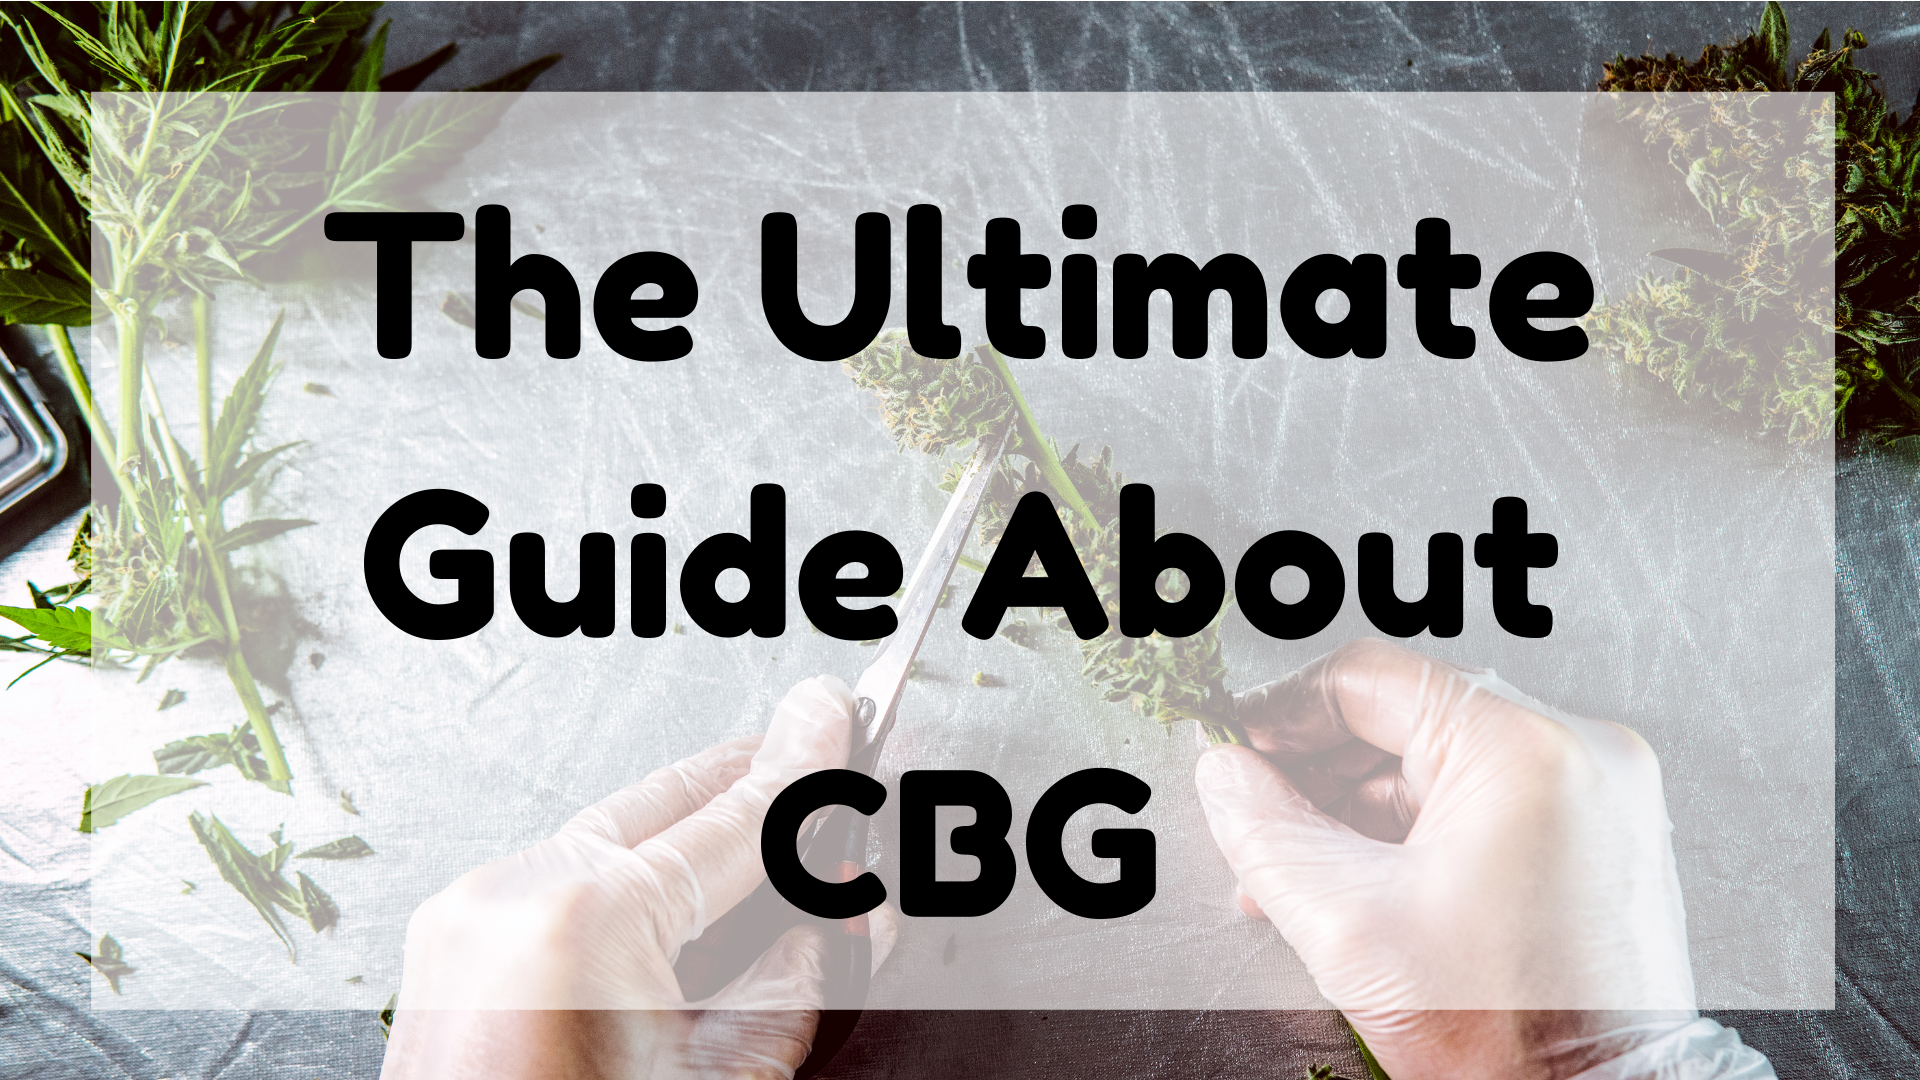 The ultimate guide about CBG